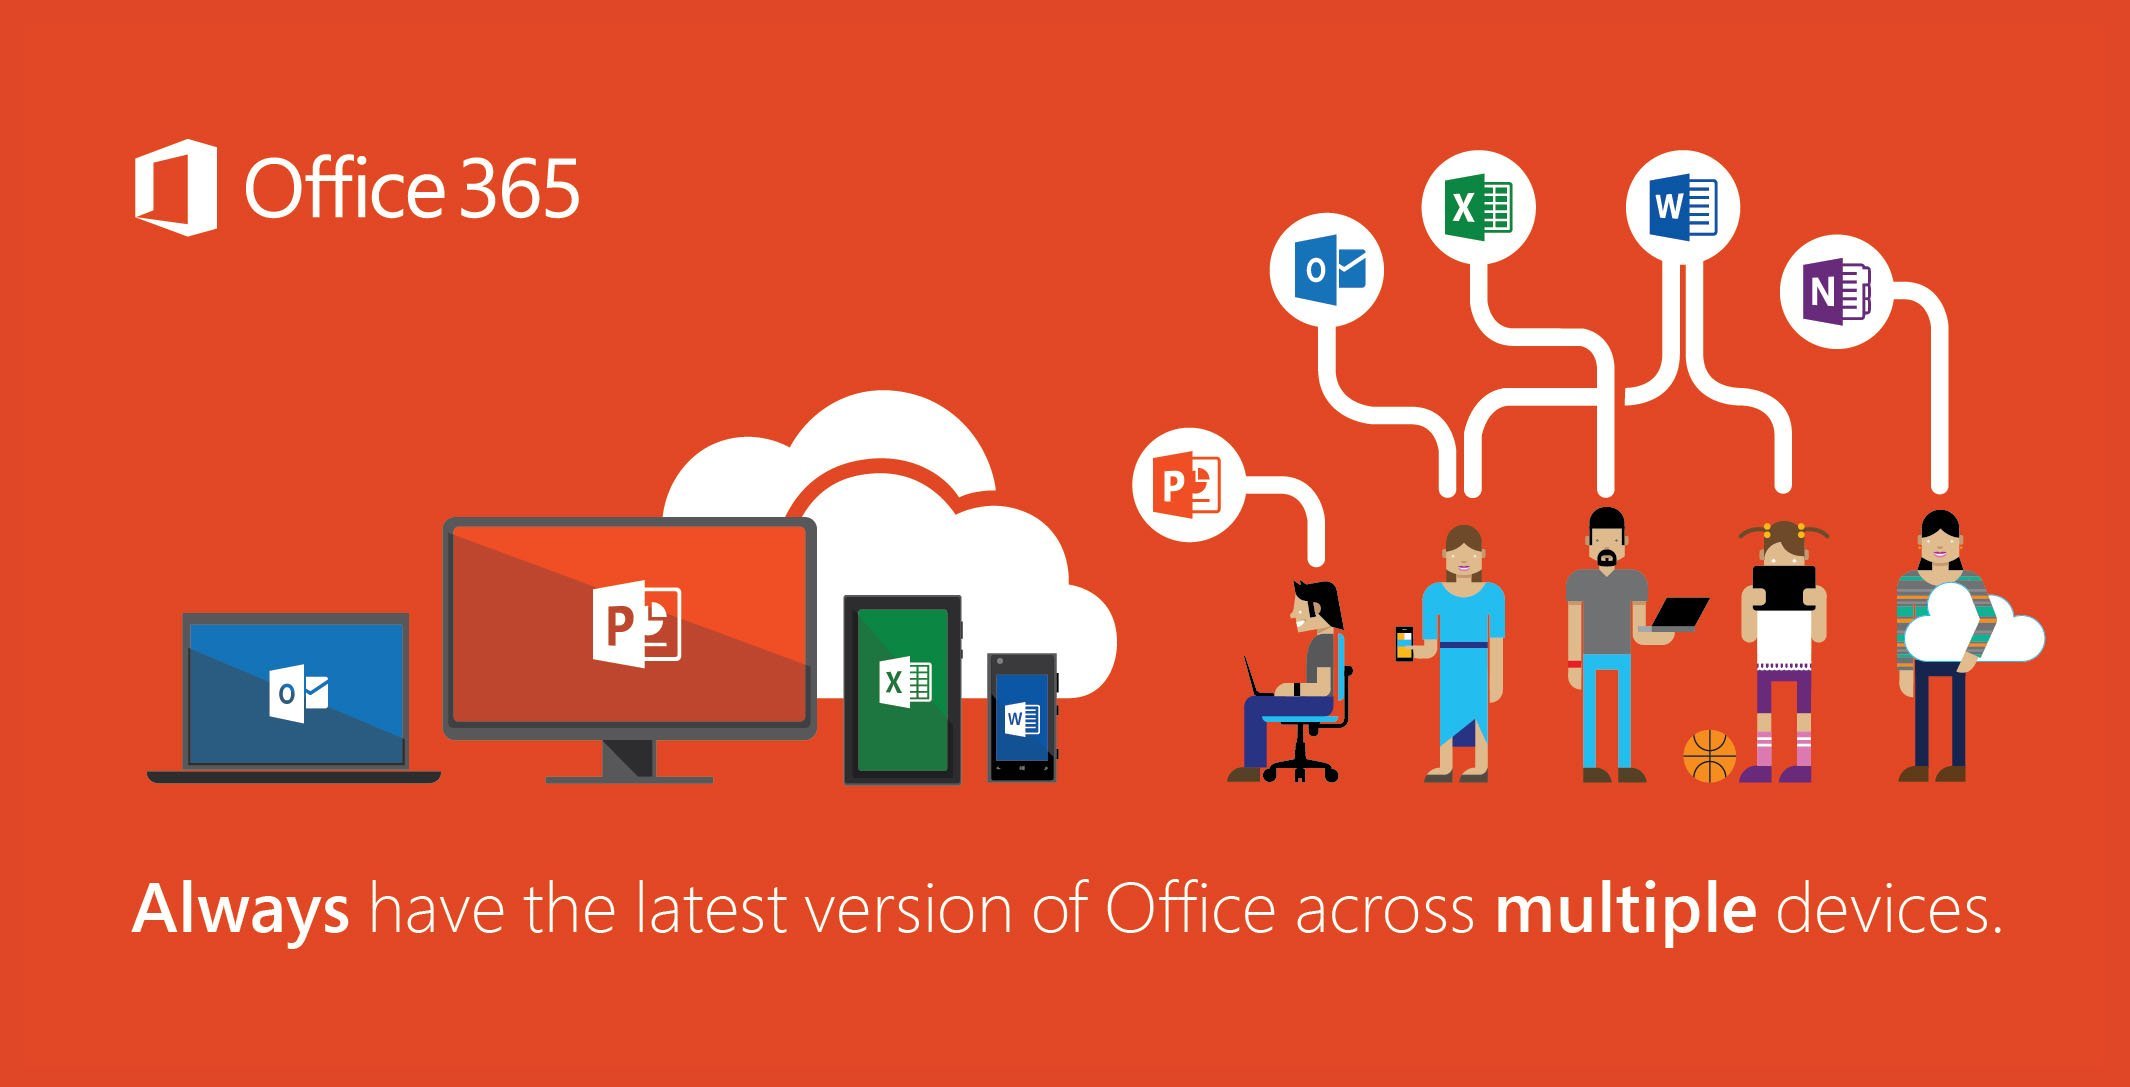 Windows power point office mac office365 os office for mac